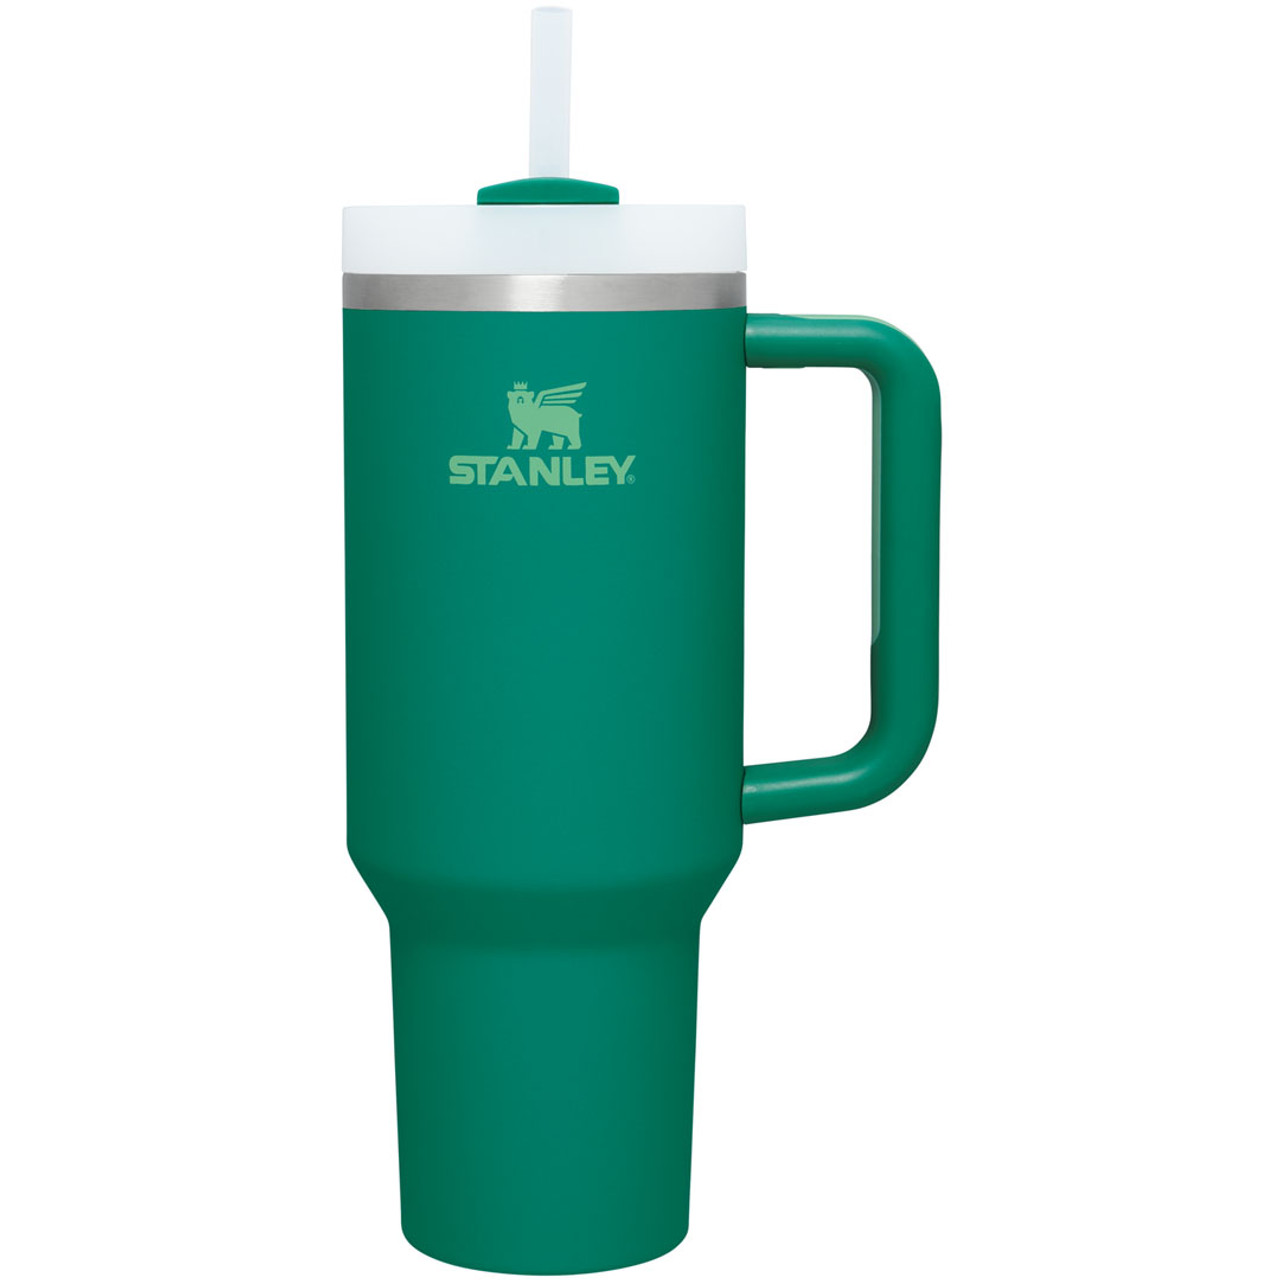 https://cdn11.bigcommerce.com/s-ppsyskcavg/images/stencil/1280x1280/products/68699/248250/B2B_Web_PNG-The-Quencher-H2-O-FlowState-Tumbler-40OZ-Alpine-Front__79828.1700148103.jpg?c=2?imbypass=on